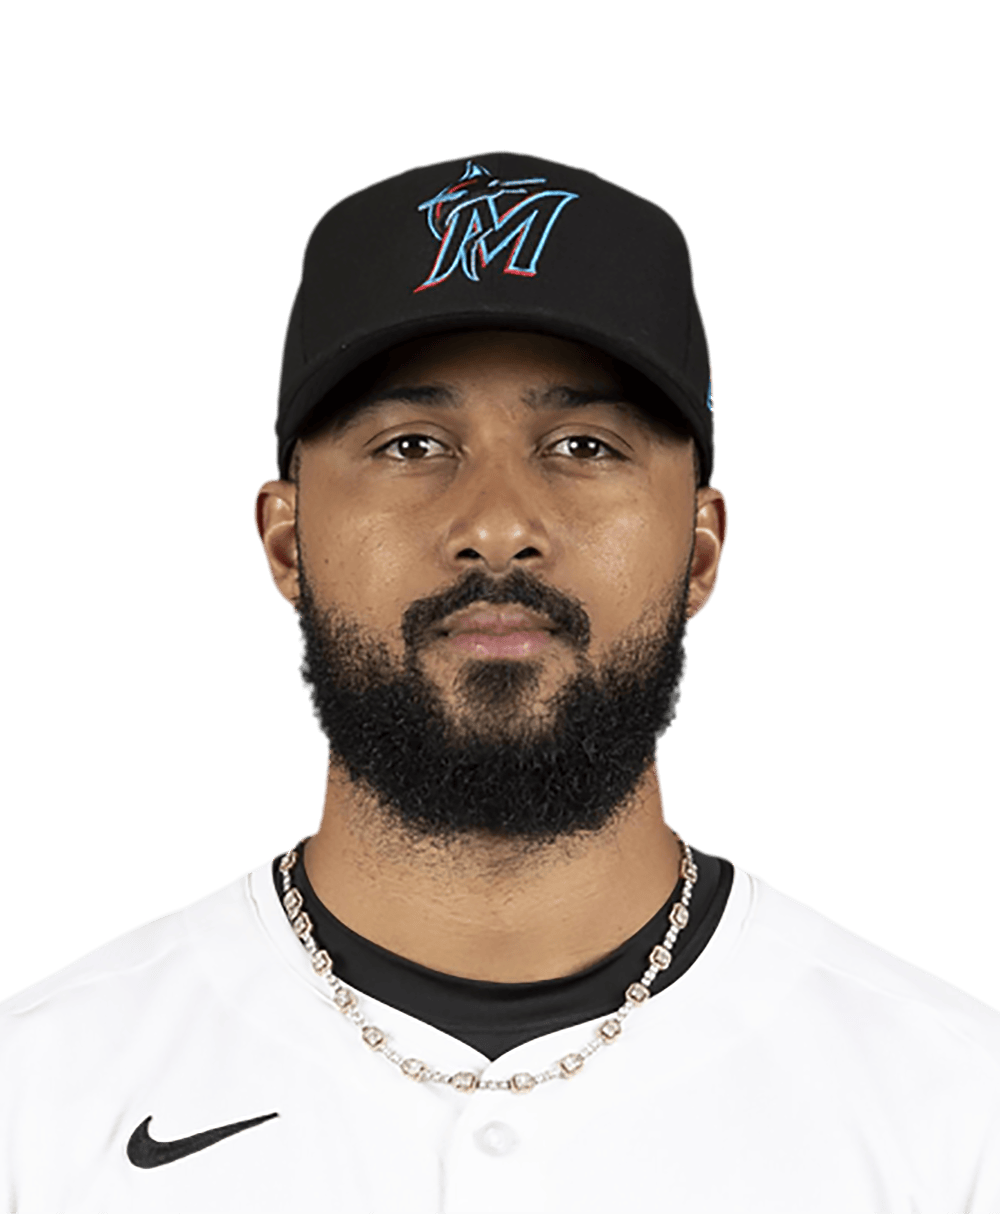 Sandy Alcantara tosses complete-game, 5-hitter as the Marlins beat